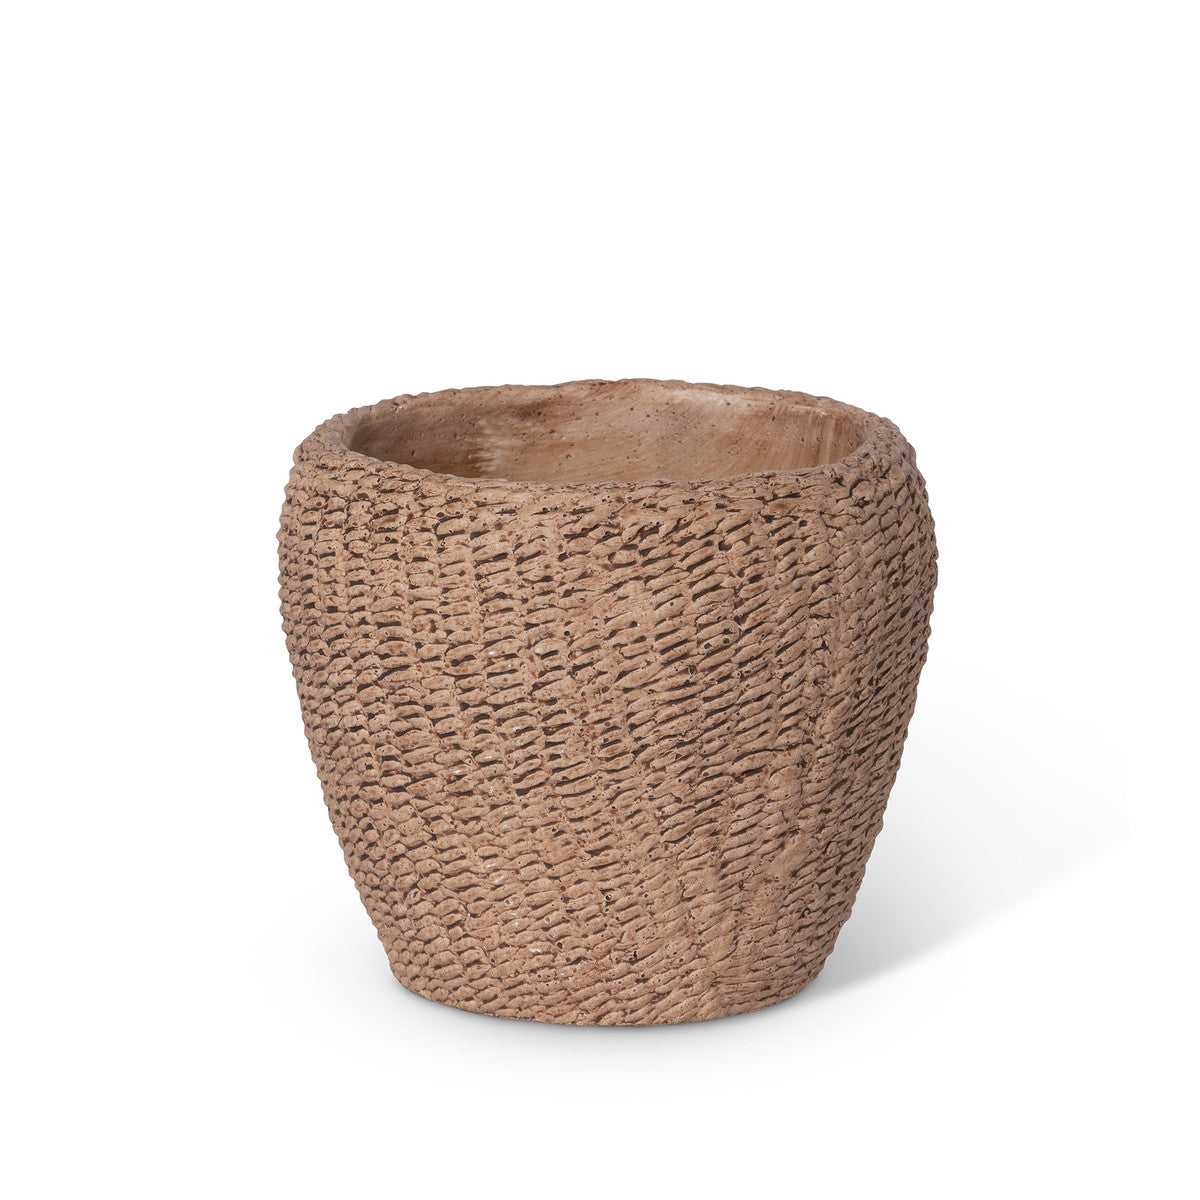 Seagrass Relief Pattern Cement Pot - 6"